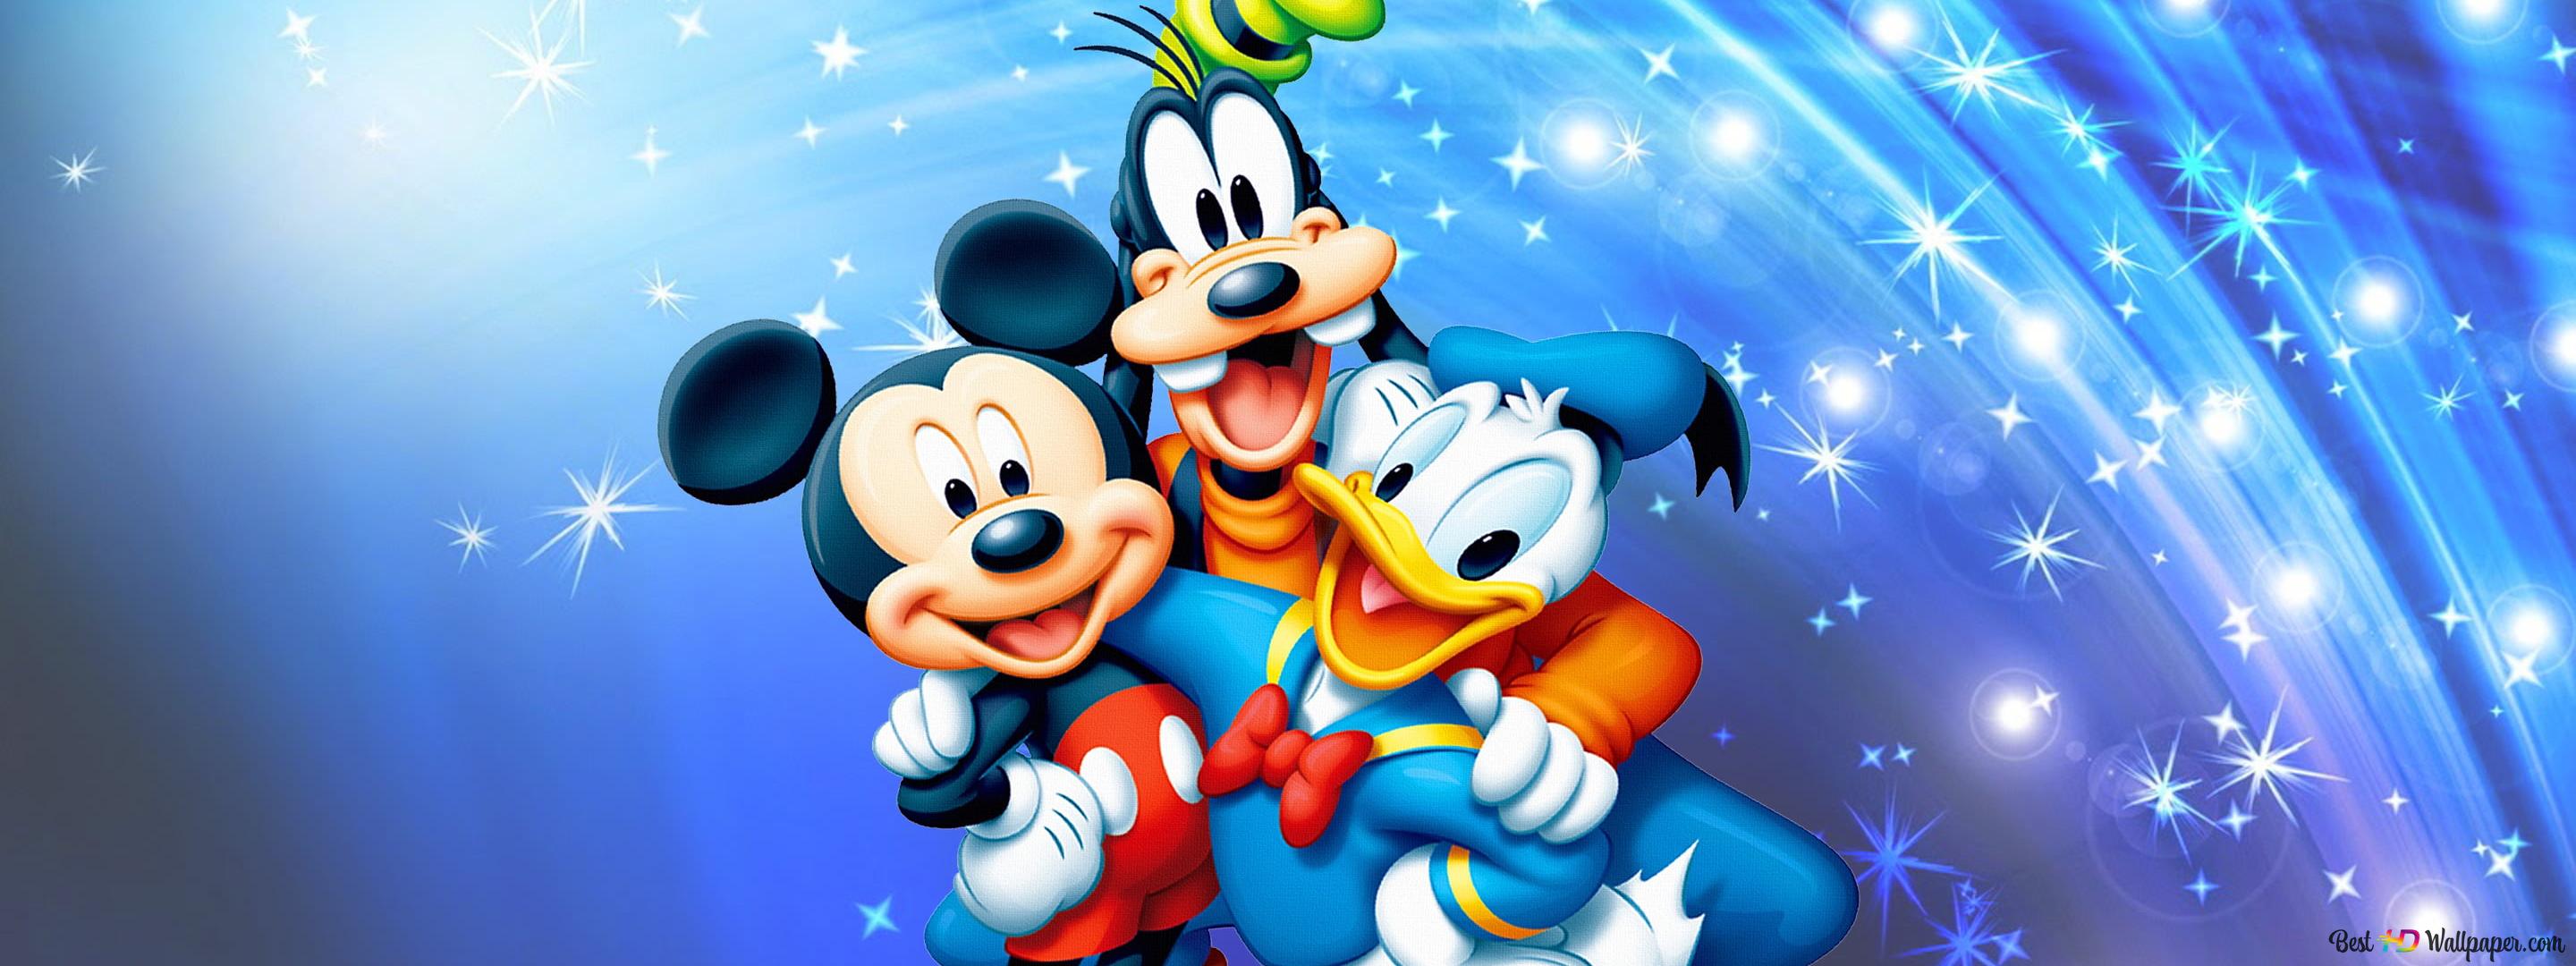 Mickey mouse donald duck and pluto 2K wallpaper download